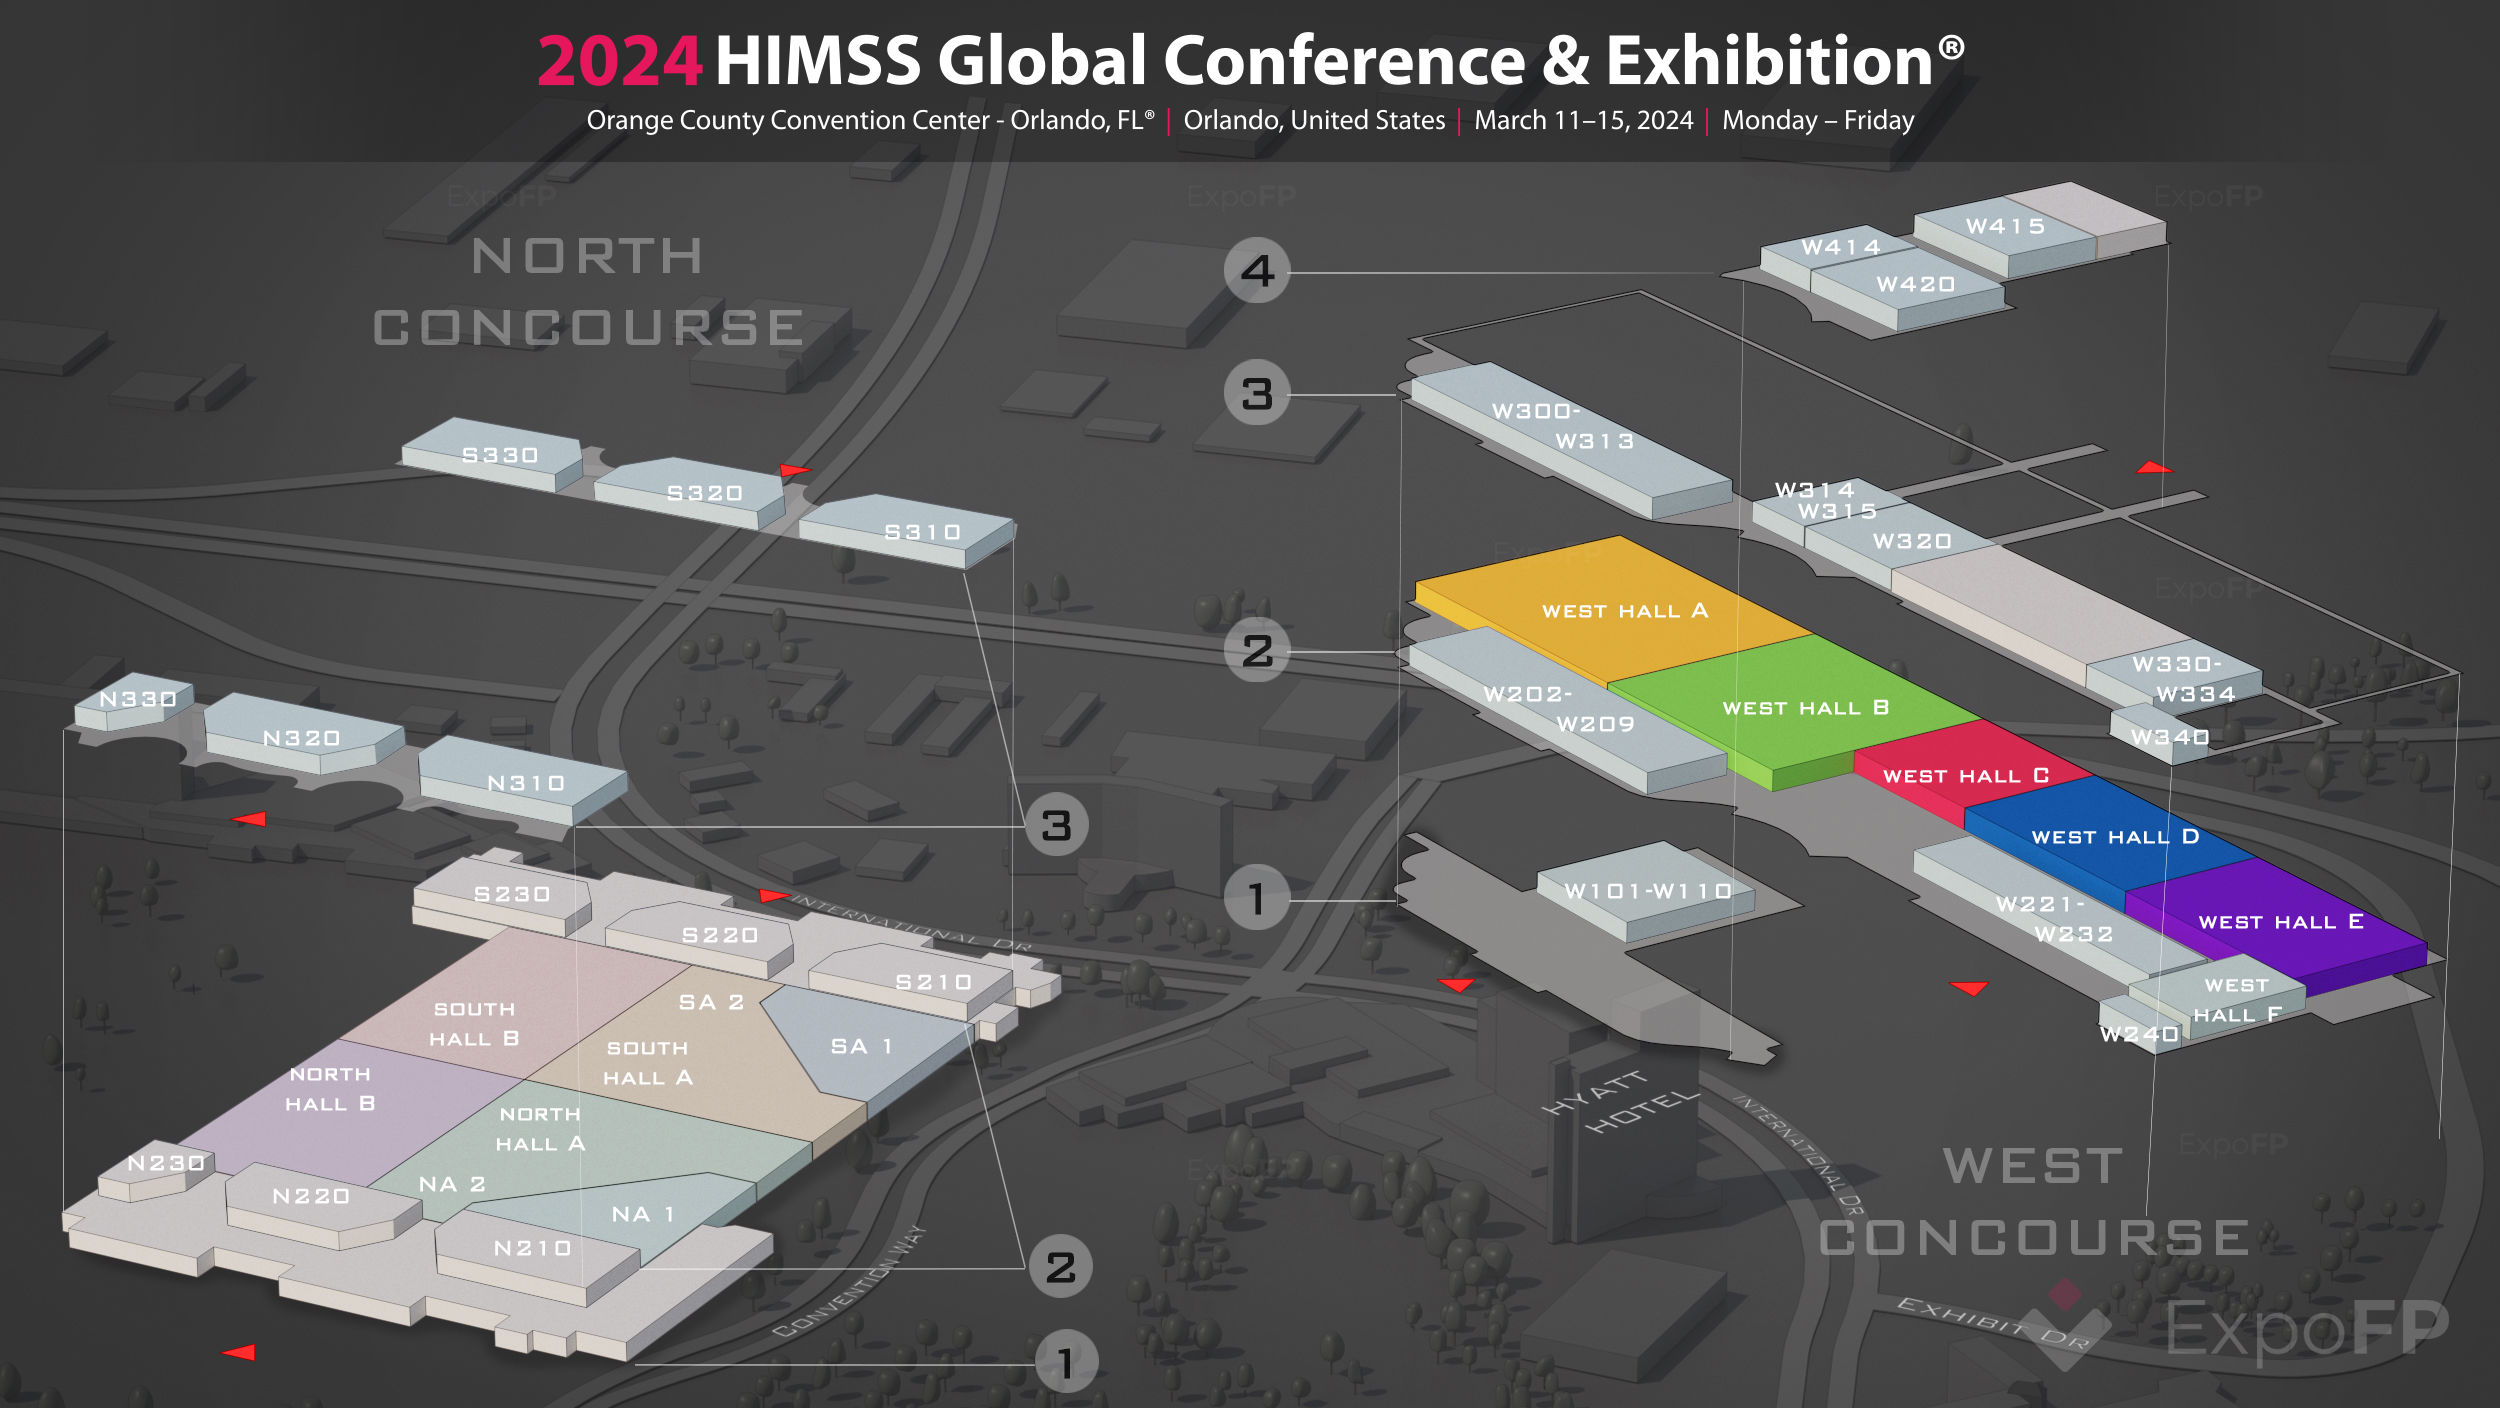 HIMSS Global Conference & Exhibition 2024 in Orange County Convention